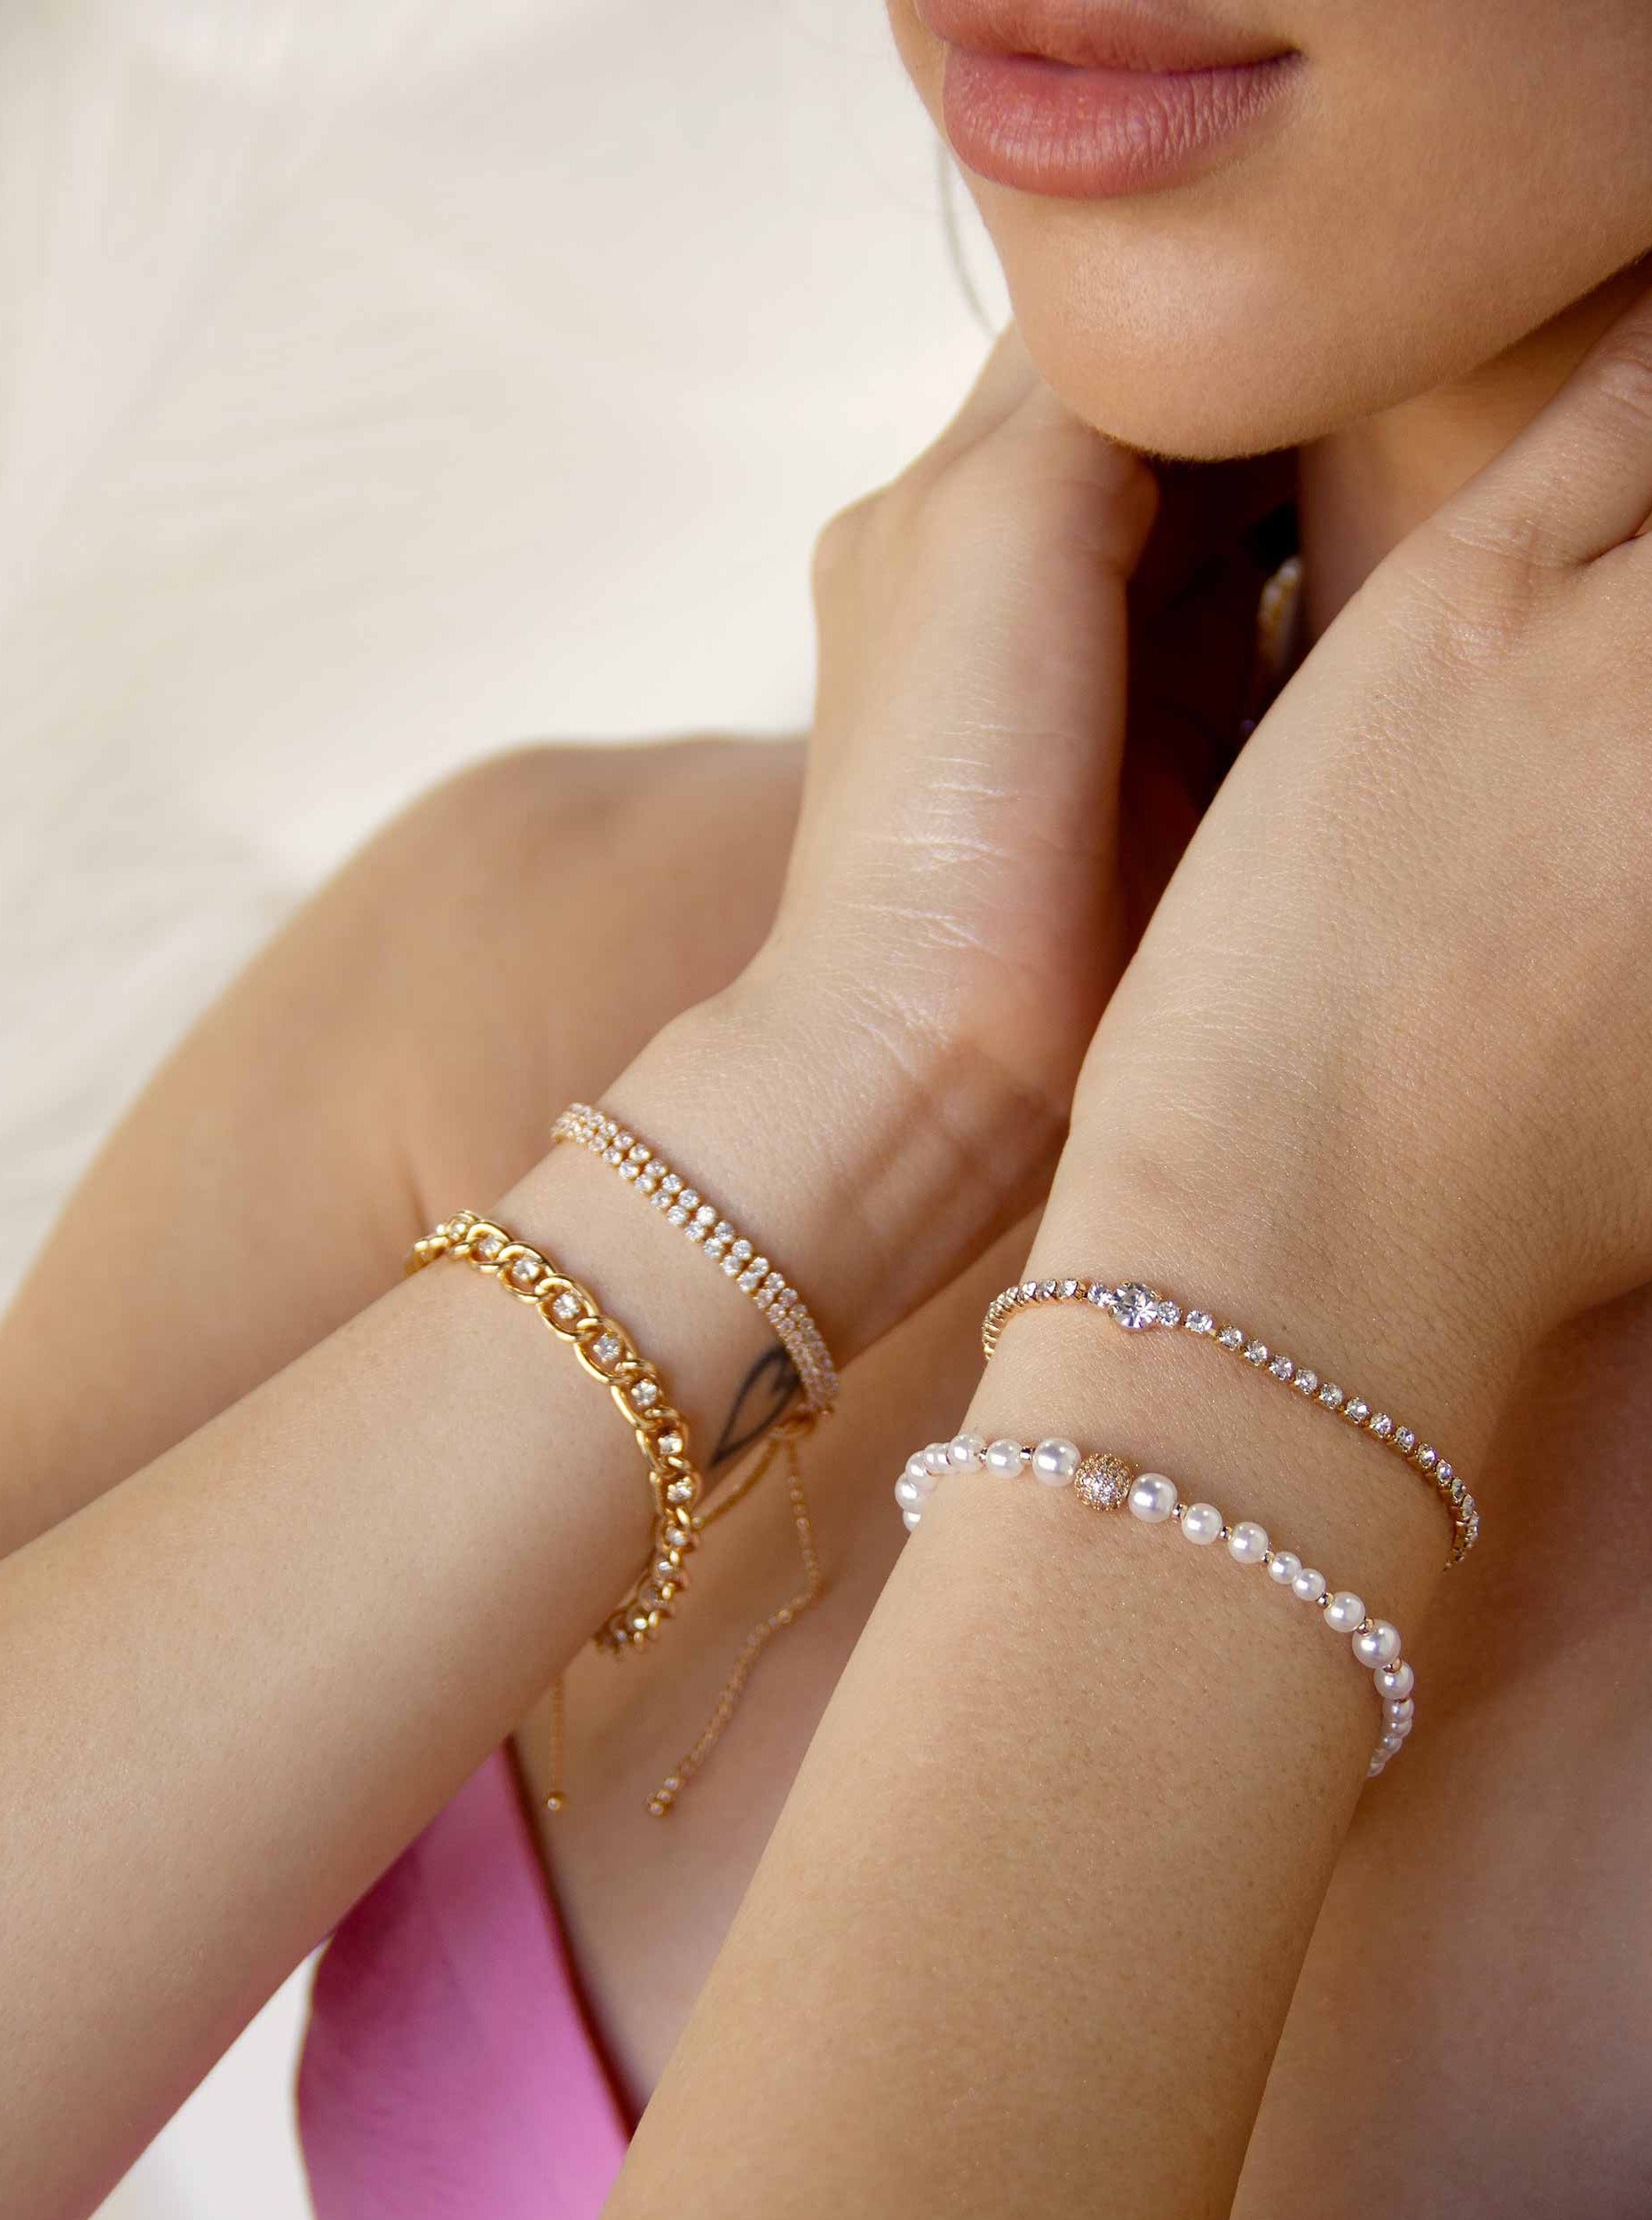 ettika Bracelet Pearl and Crystal Mixed 18k Gold Plated // Bracelet Stack